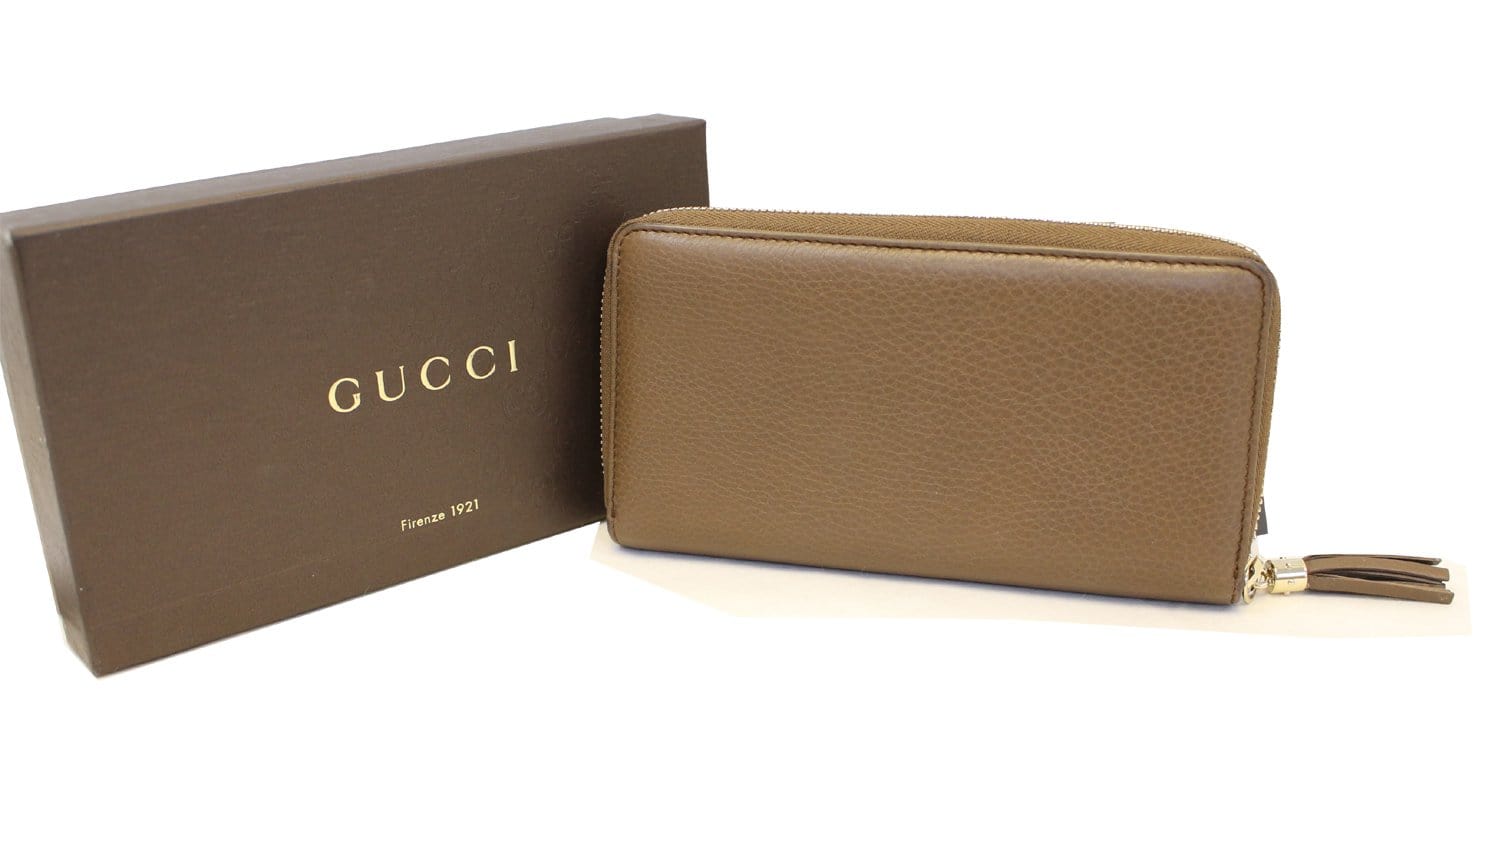 GUCCI VINTAGE GUCCISSIMA GG INTERLOCKING LEATHER LONG WALLET MEN BROWN  ITALY